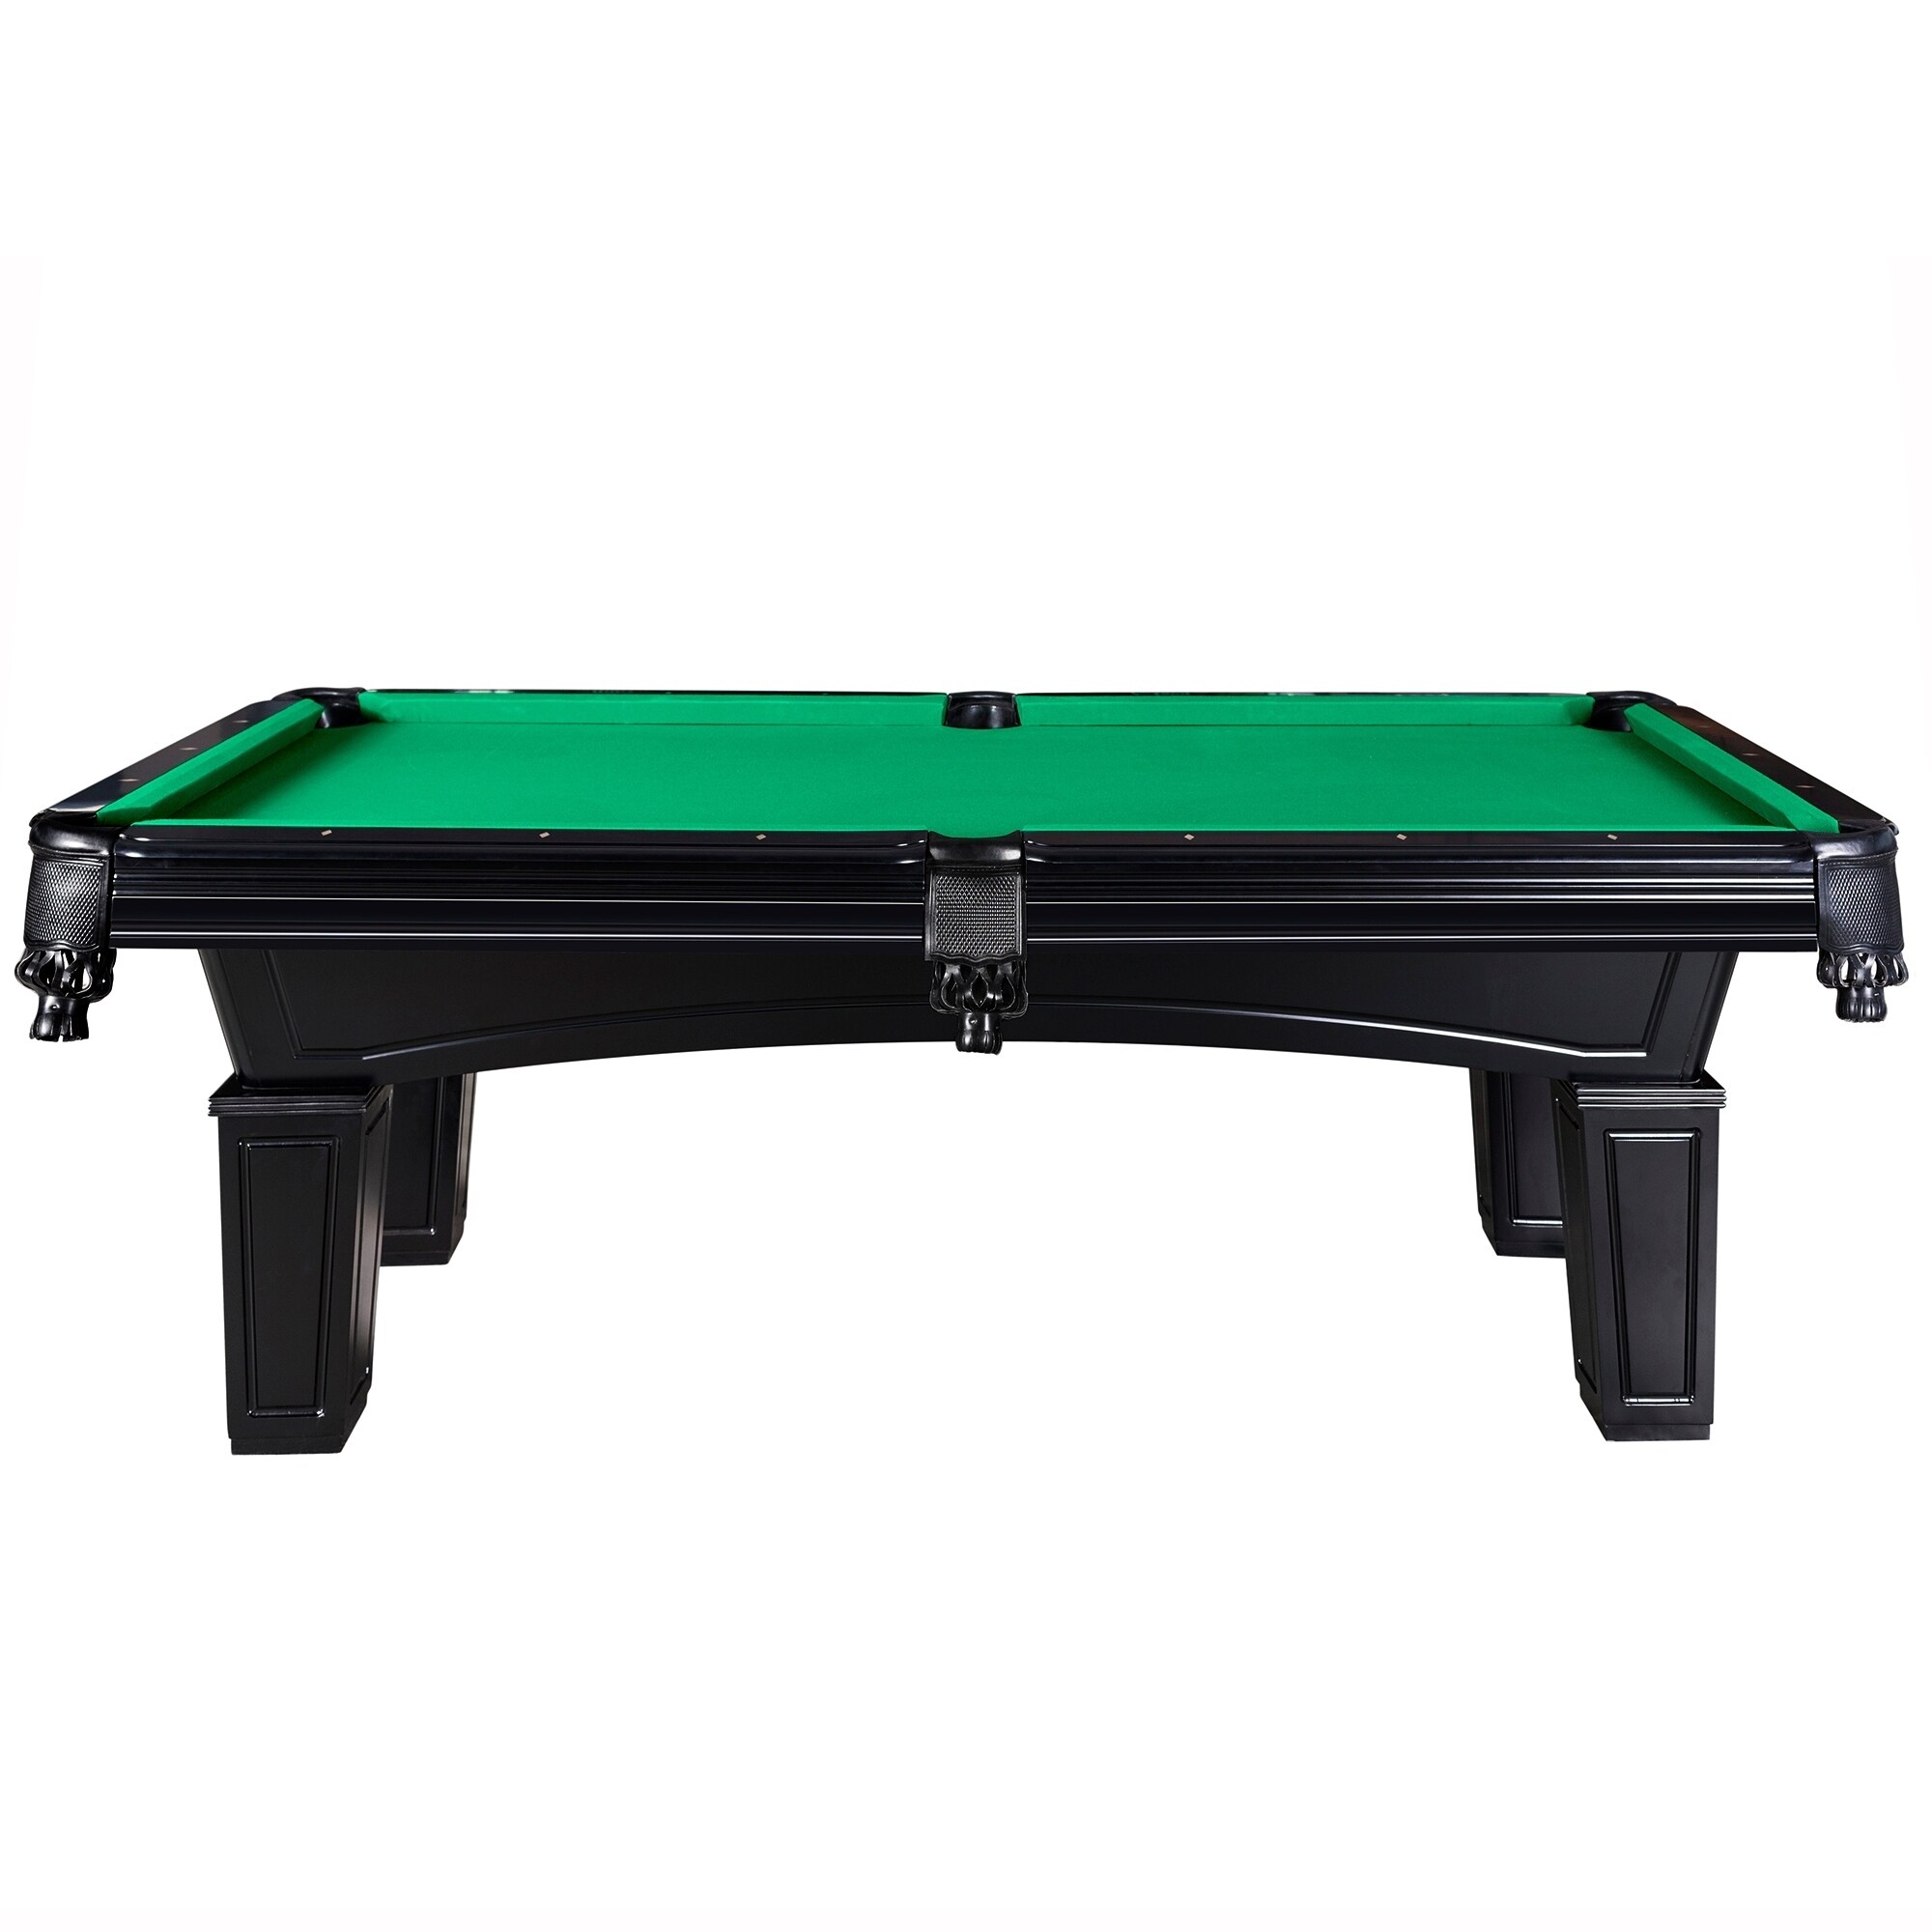 Billiards 8' x 4'  Pool Table  Foremost  1" thick 1 piece Slate Vintage  000 